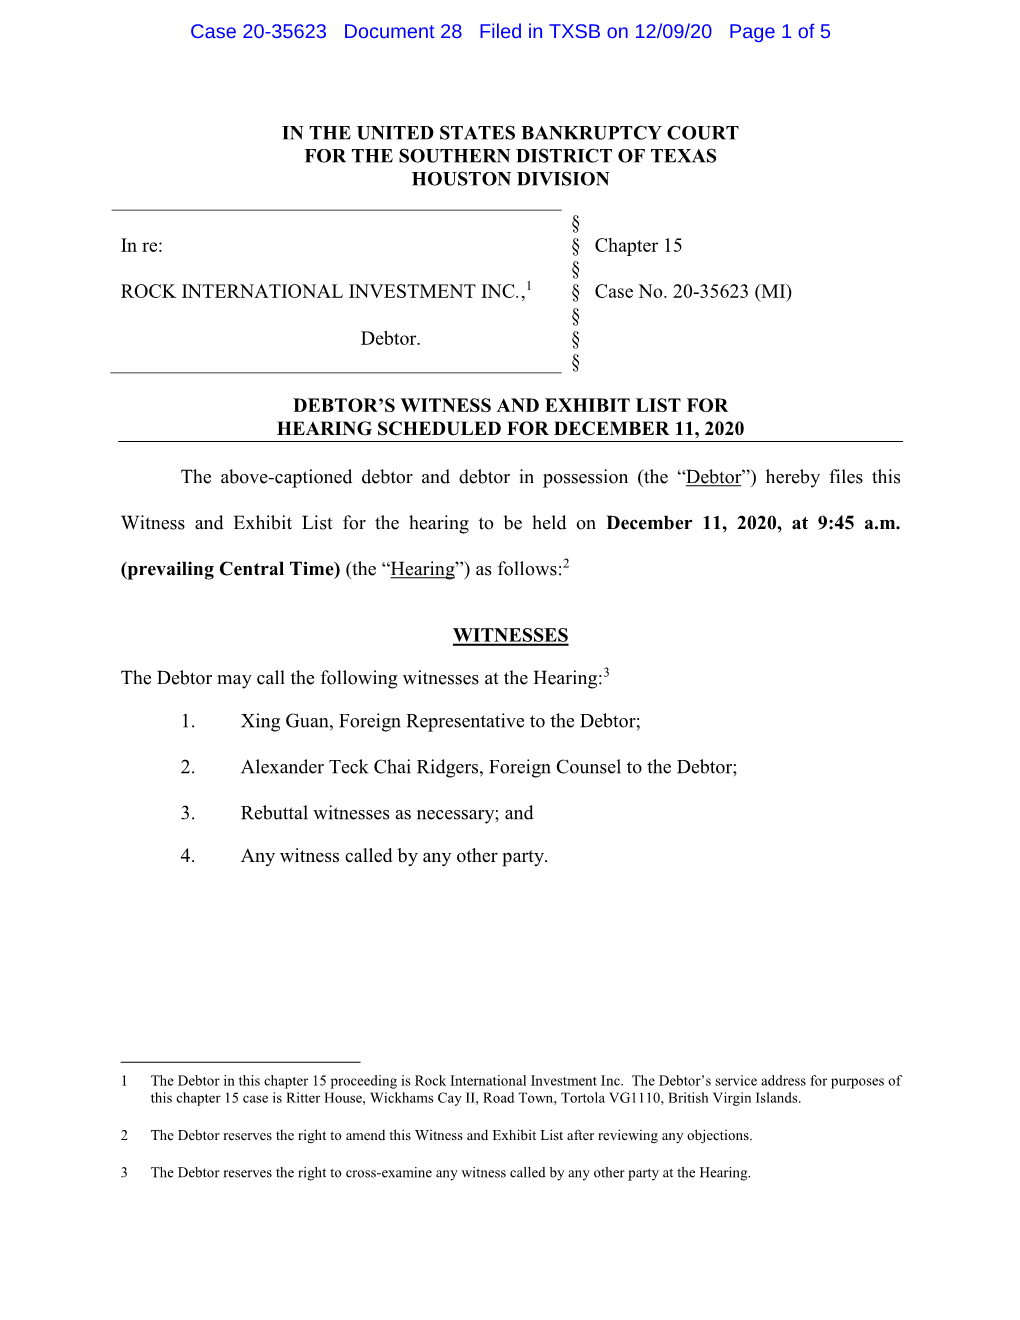 Case 20-35623 Document 28 Filed in TXSB on 12/09/20 Page 1 of 5